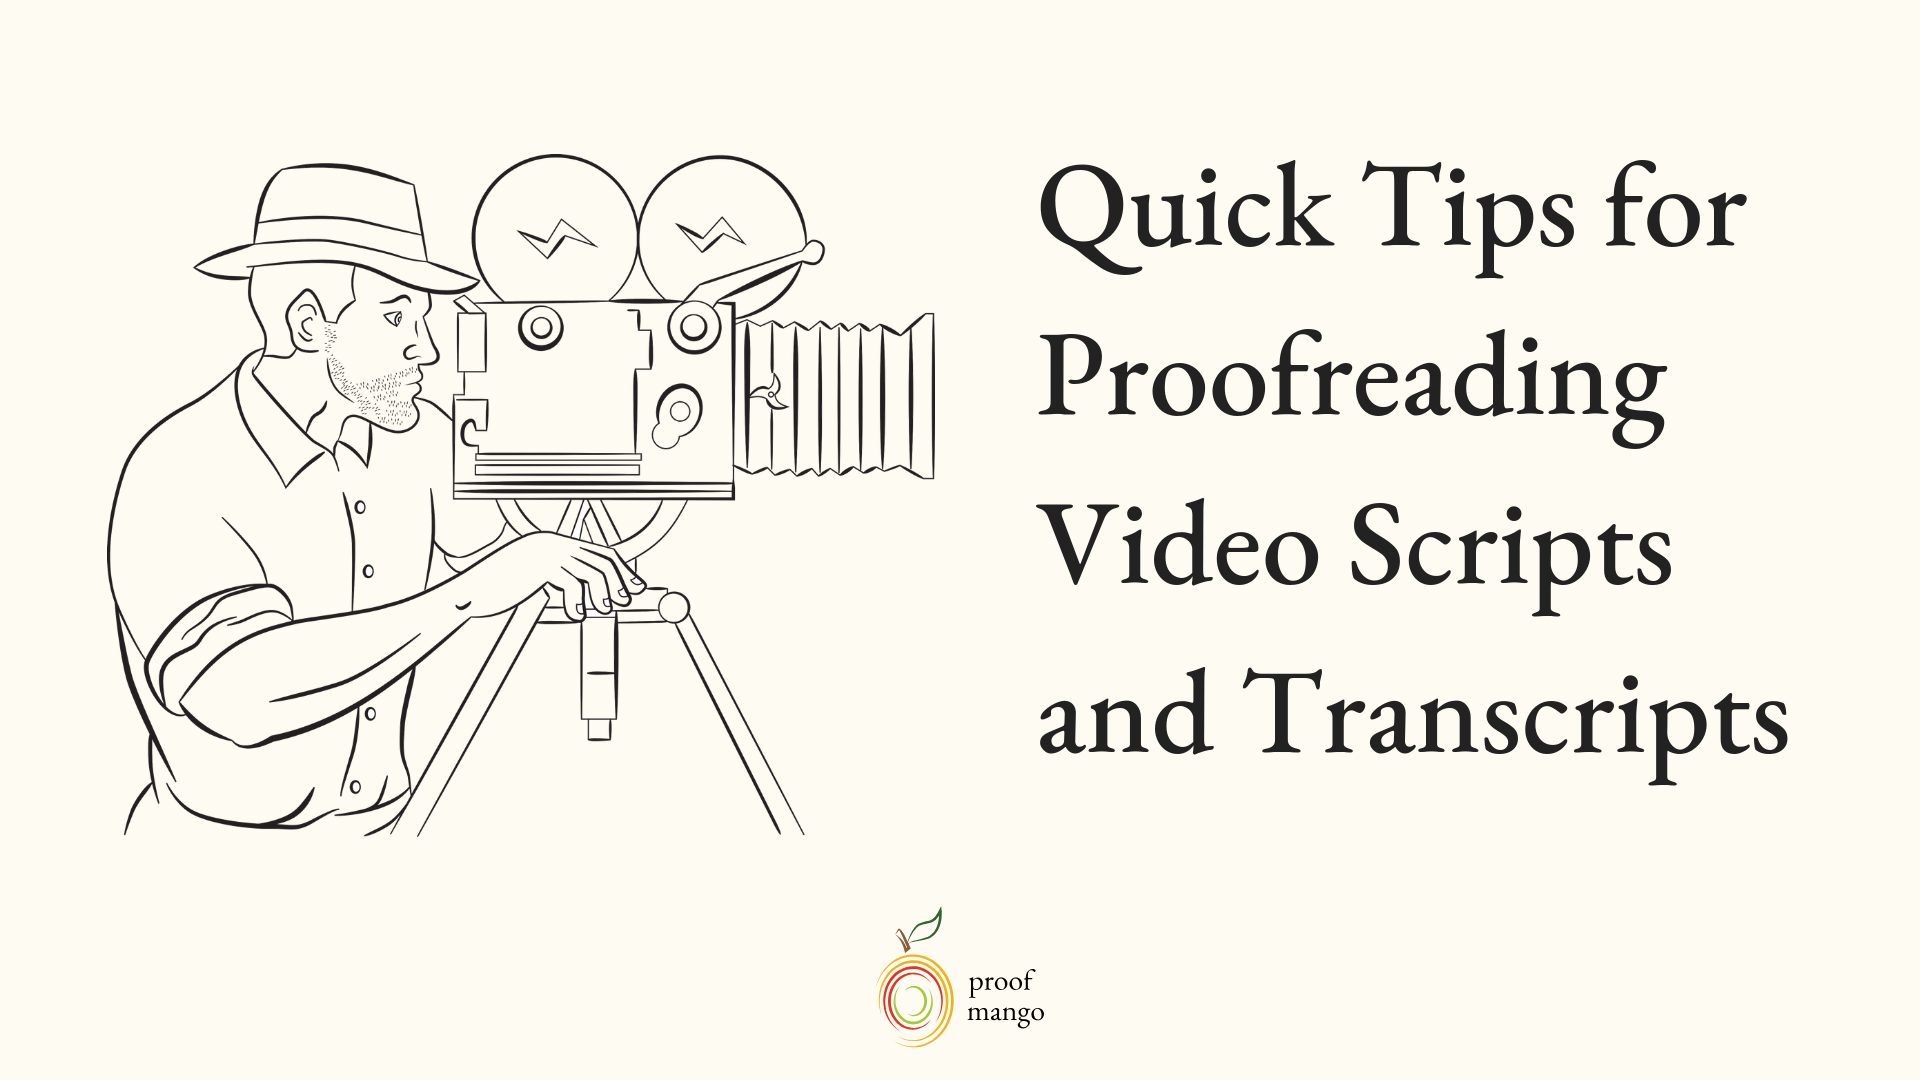 Quick-Tips-For-Proofreading-Video-Scripts-and-Transcripts